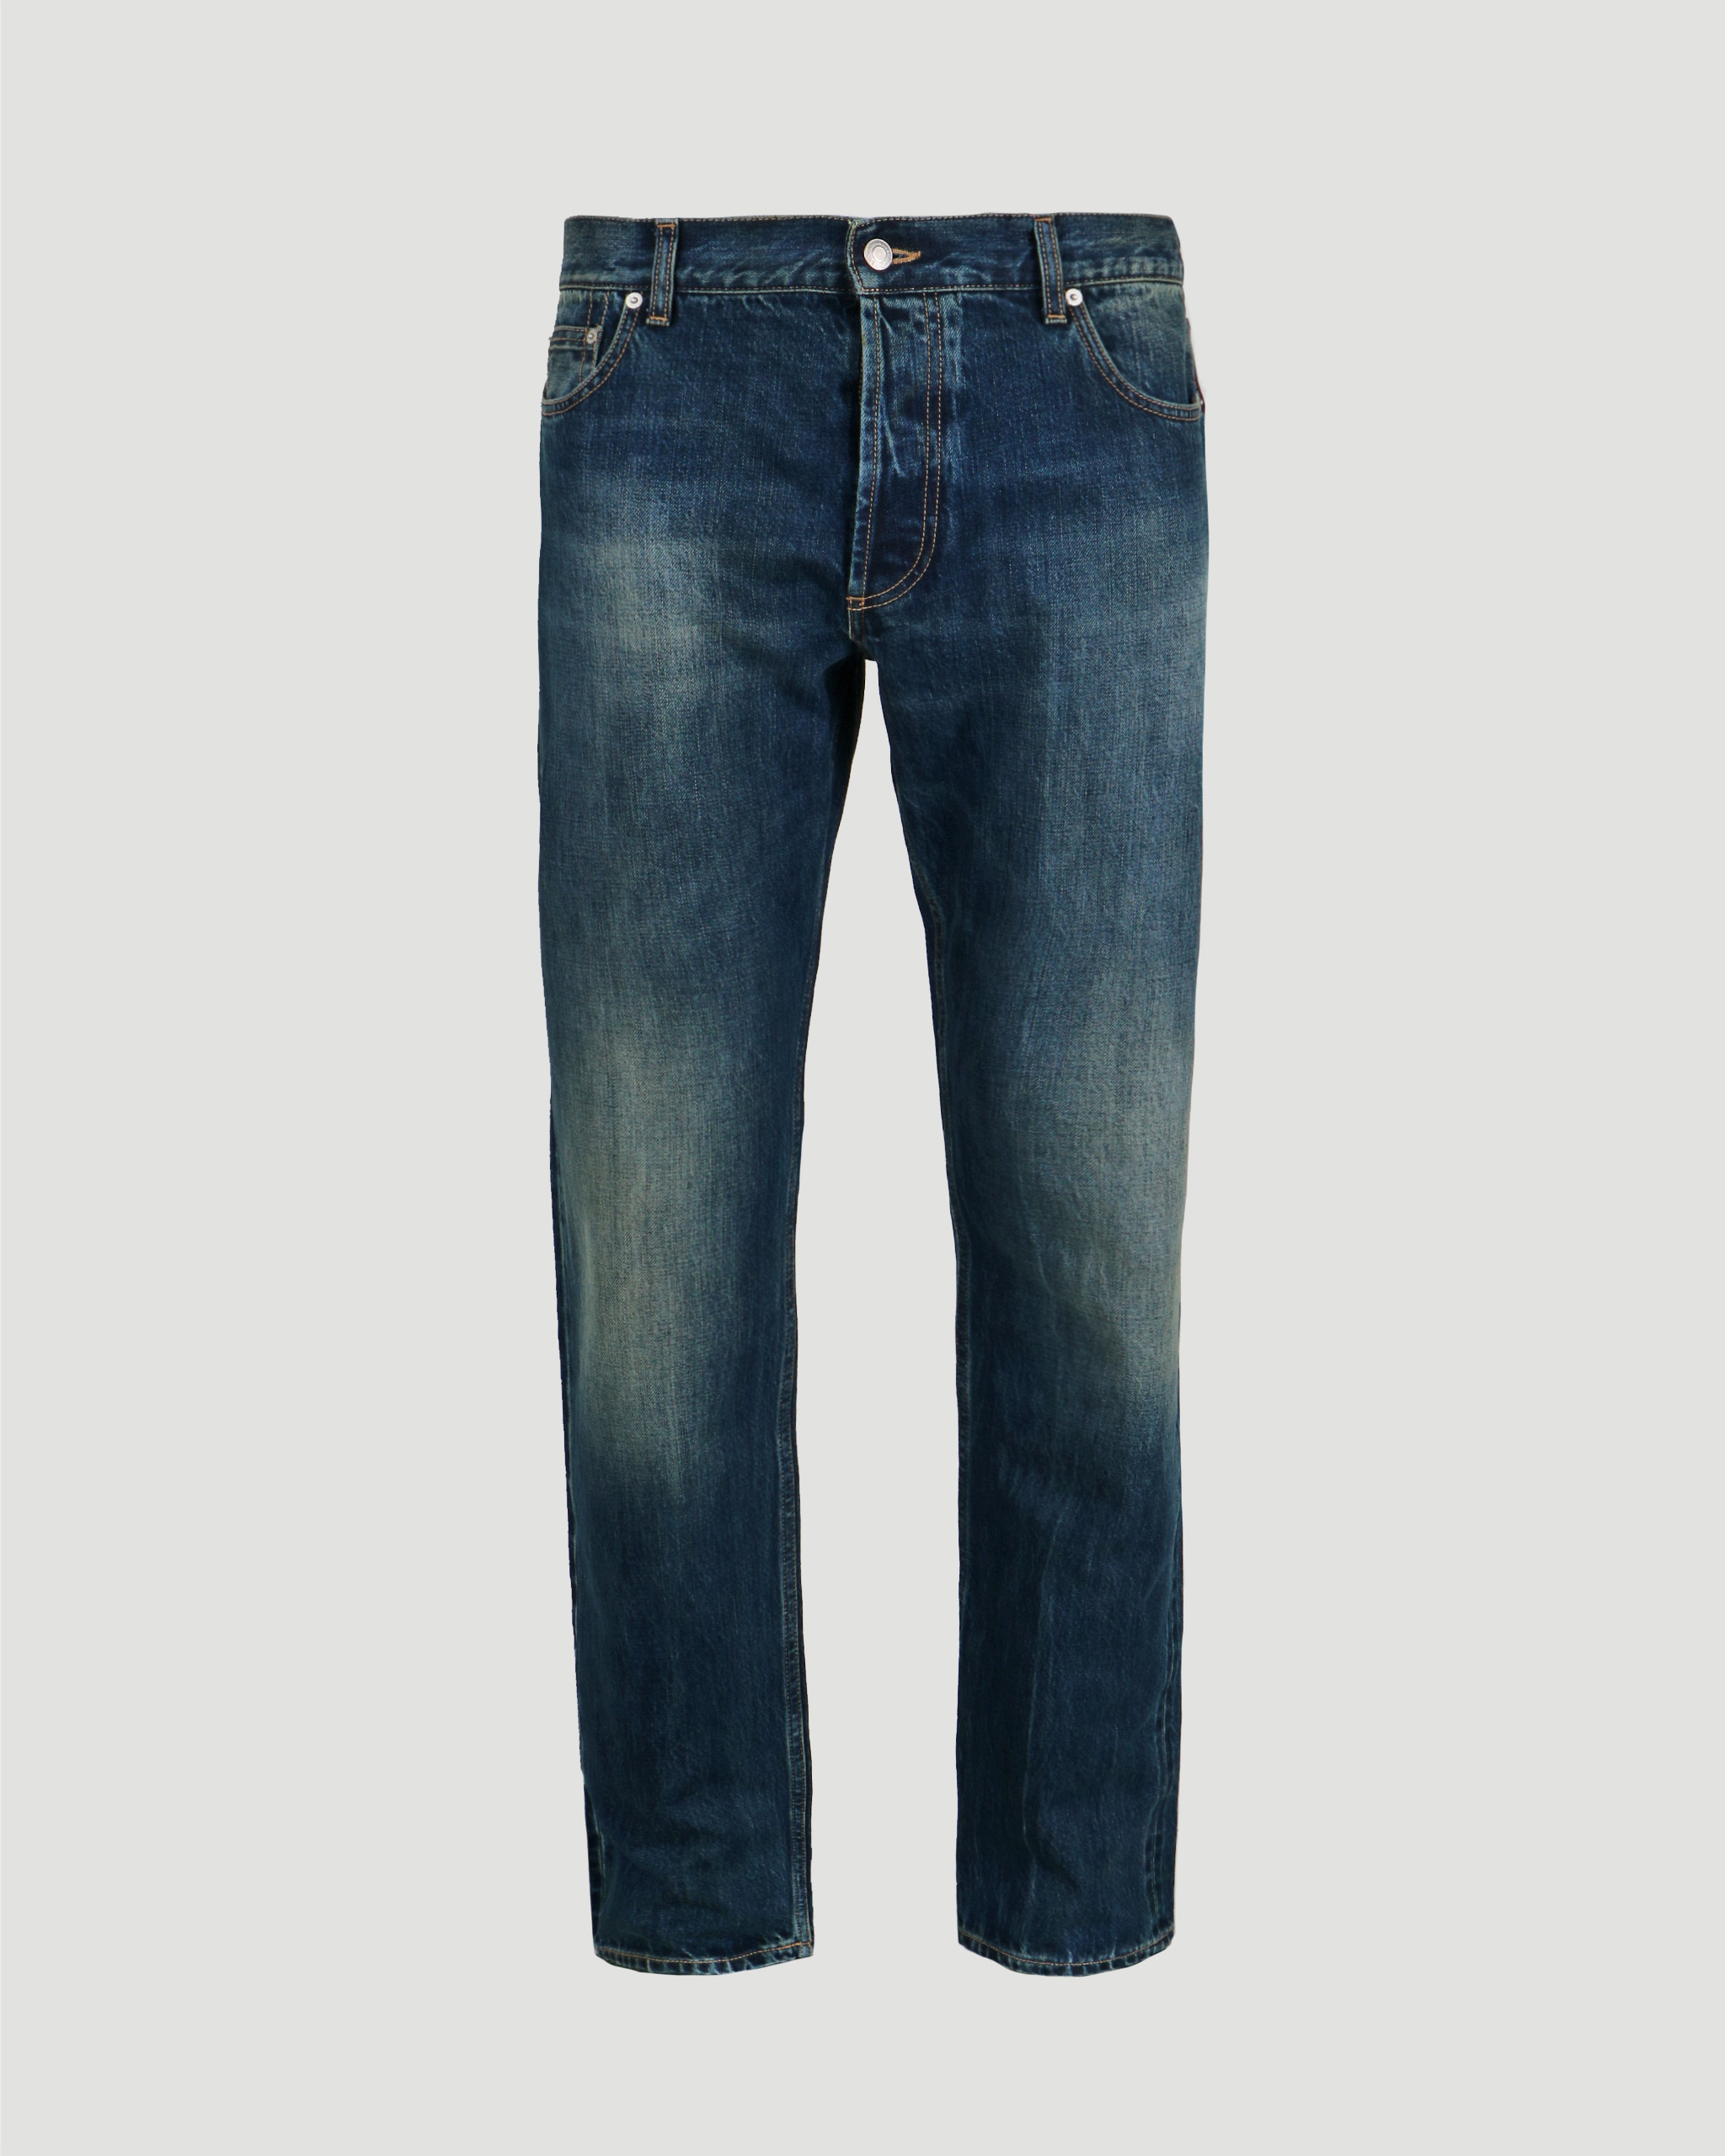 Signature Selvedge Denim Jeans in Washed Blue - All-U-Re